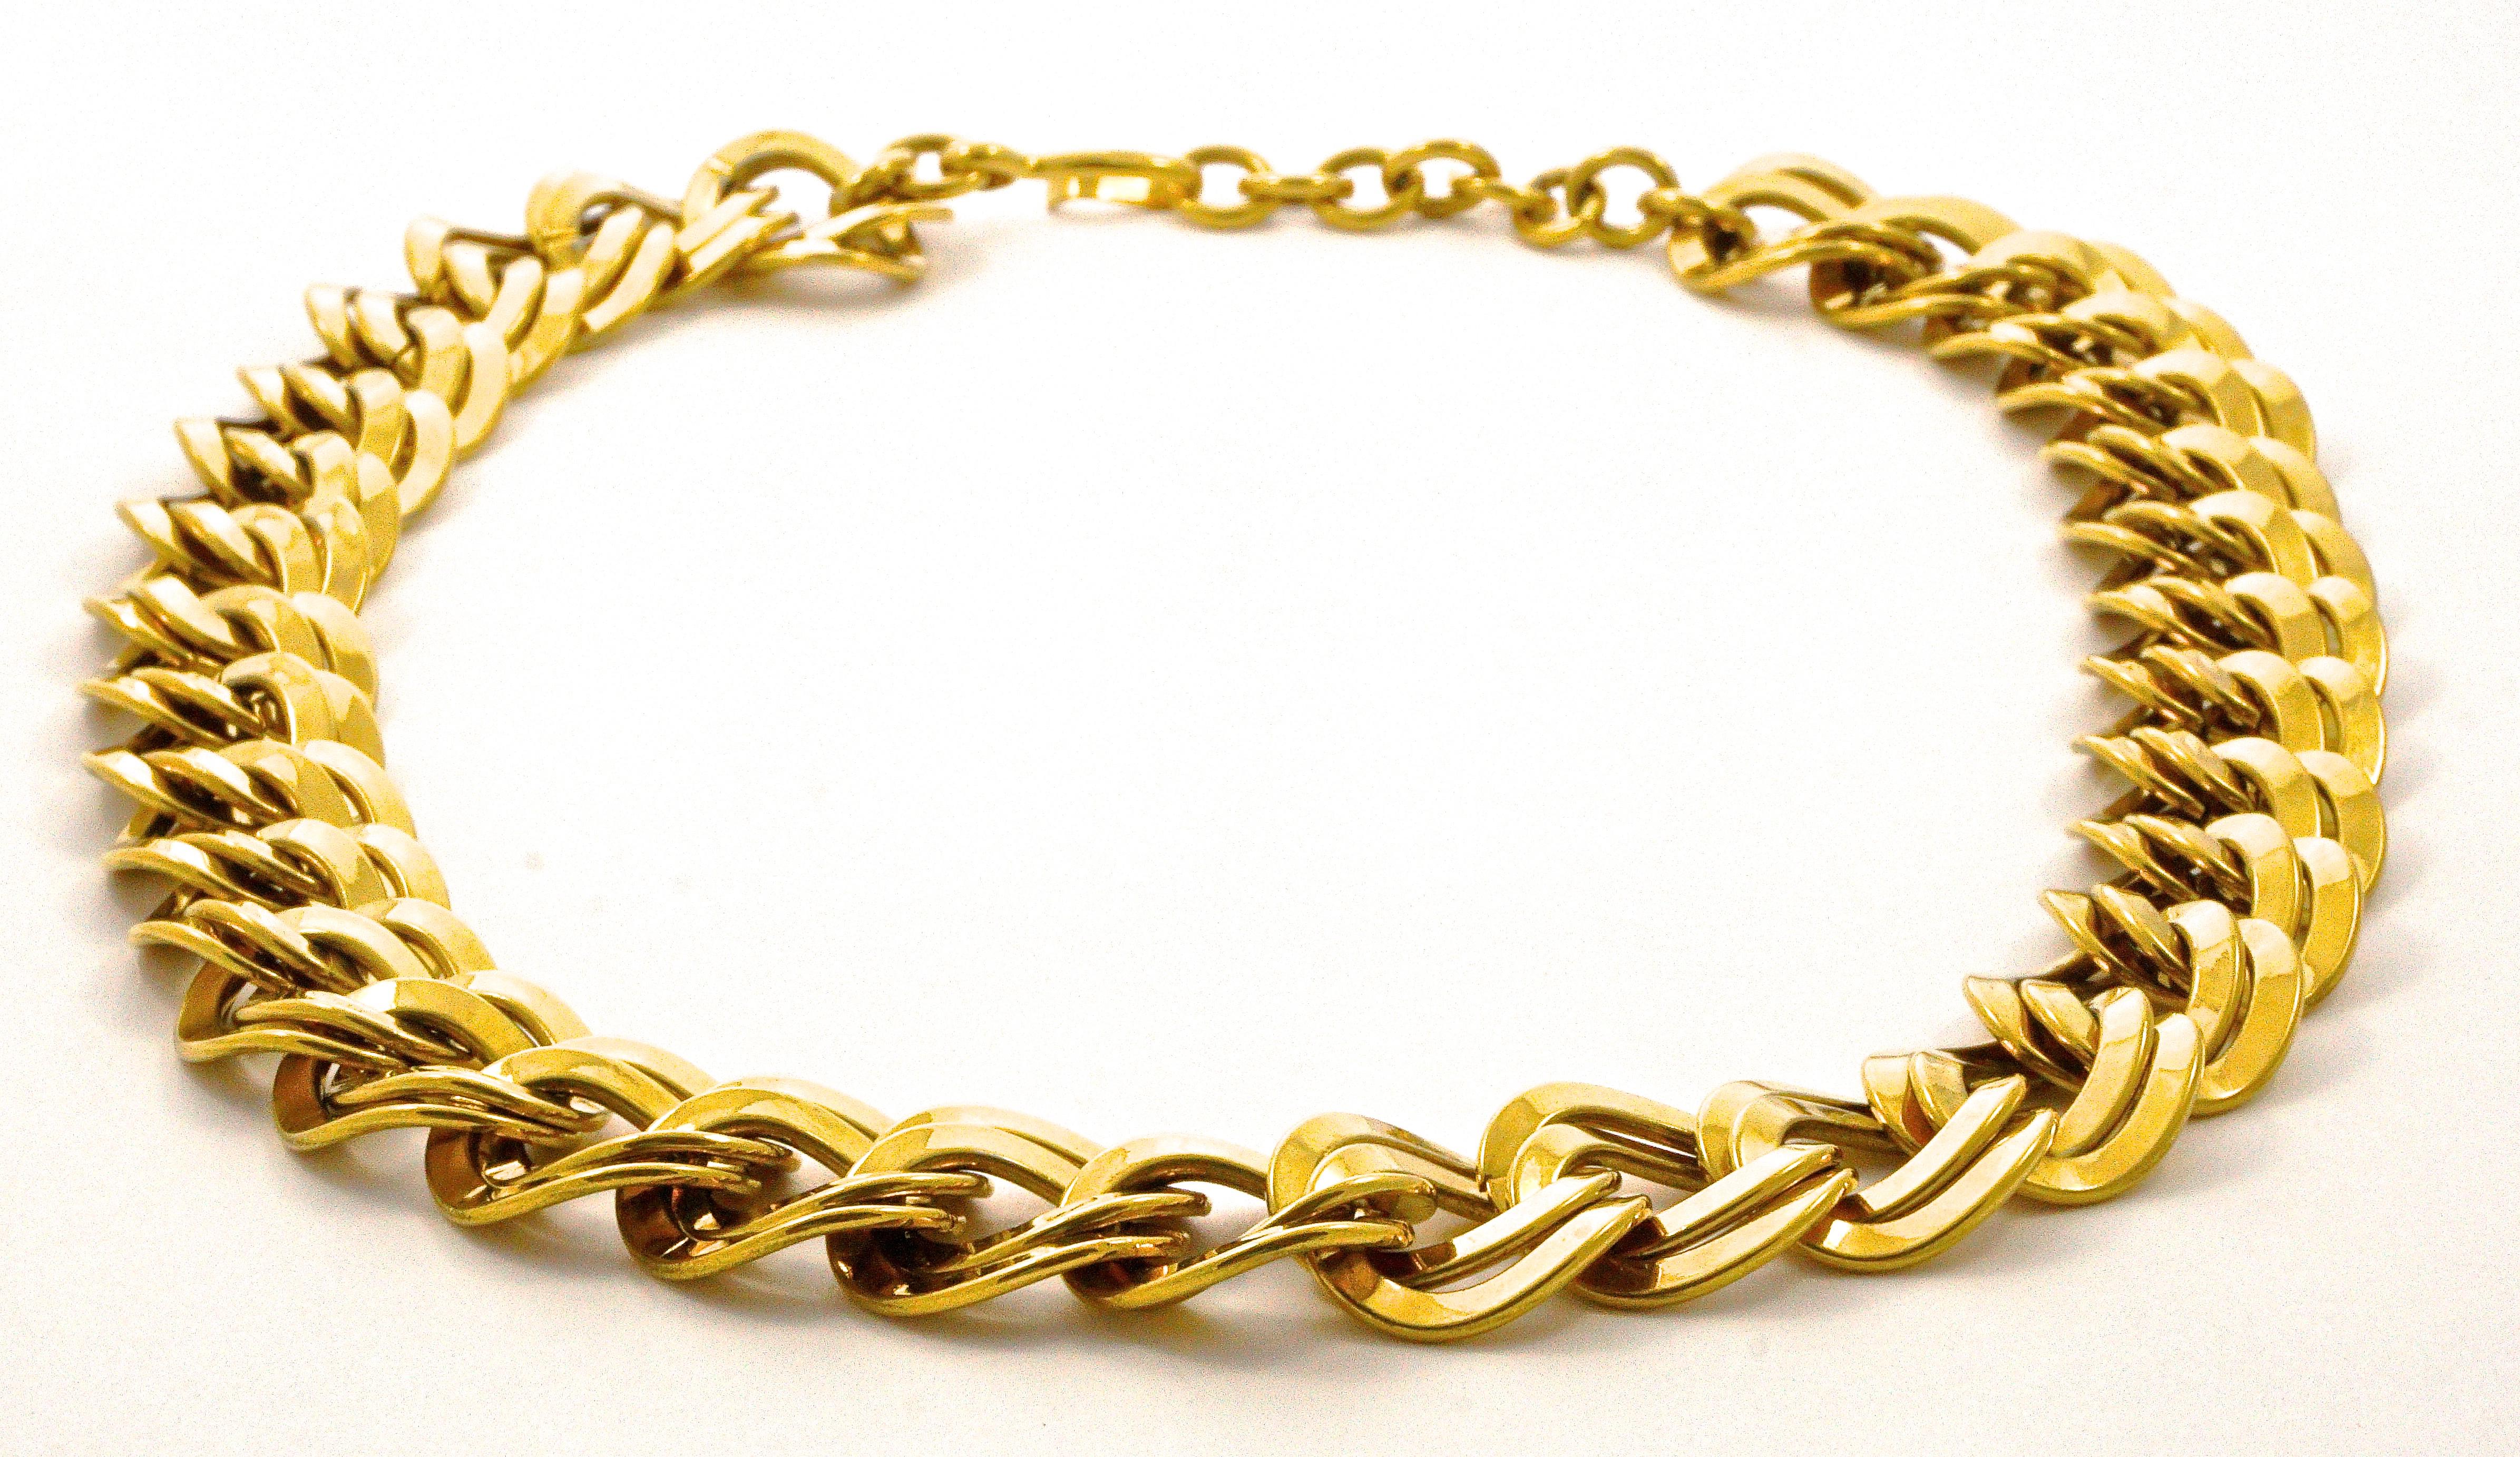 Monet Gold Plated Double Link Chain Statement Necklace circa 1980s  1